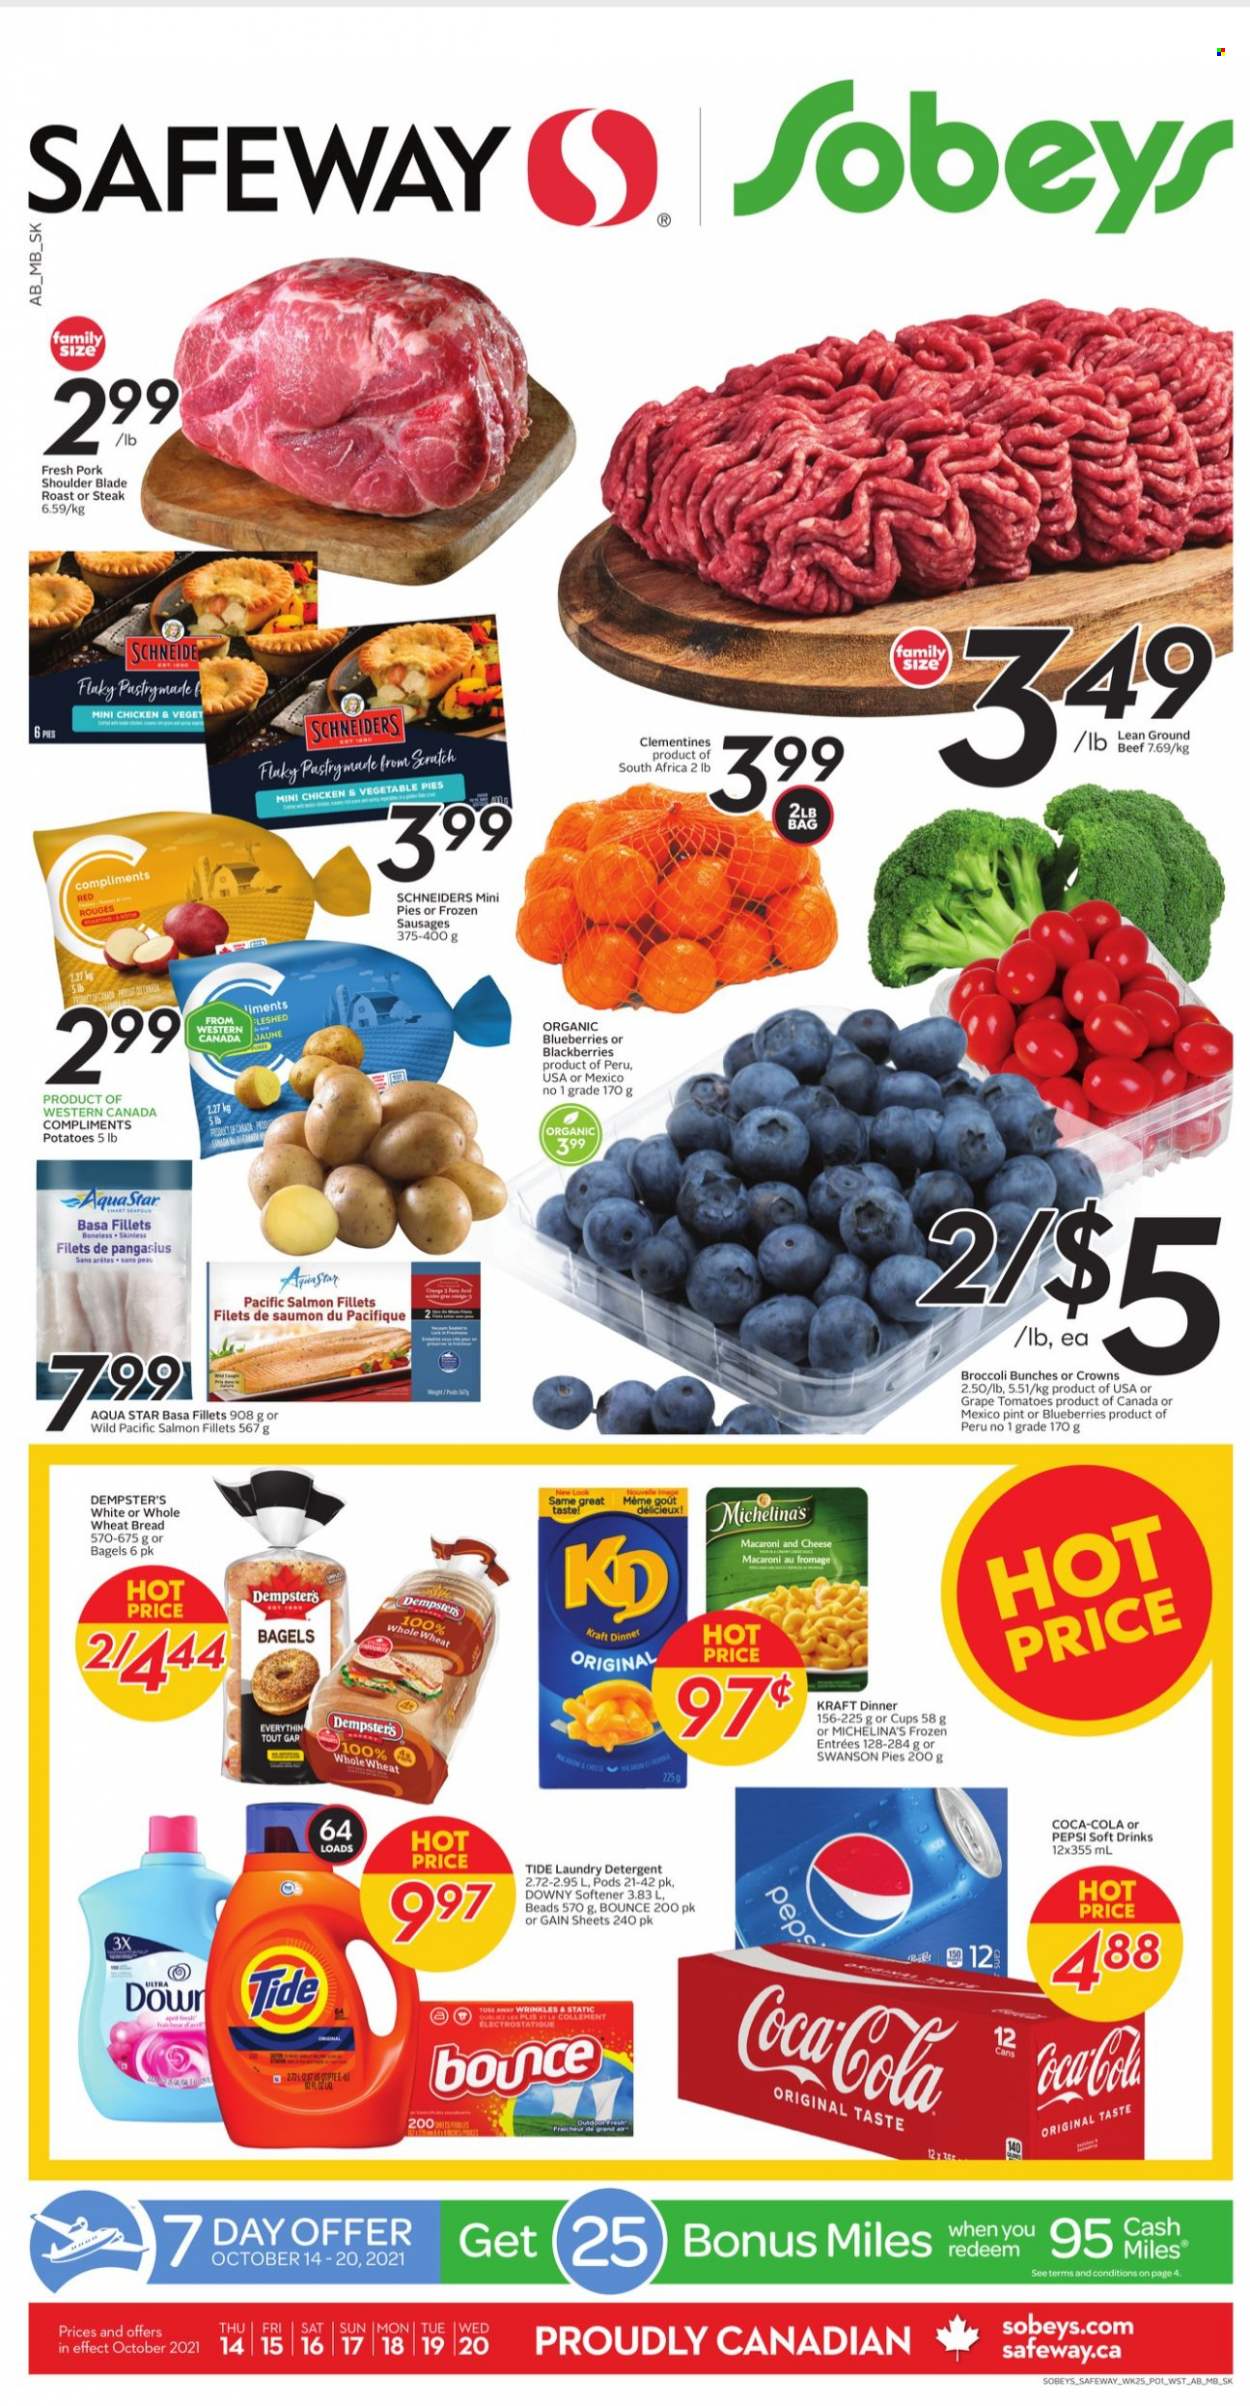 thumbnail - Safeway Flyer - October 14, 2021 - October 20, 2021 - Sales products - bagels, wheat bread, broccoli, tomatoes, potatoes, blackberries, blueberries, clementines, salmon, salmon fillet, pangasius, macaroni & cheese, Kraft®, sausage, Coca-Cola, Pepsi, soft drink, pork meat, pork shoulder, Gain, Tide, fabric softener, laundry detergent, Bounce, Downy Laundry, detergent, steak. Page 1.